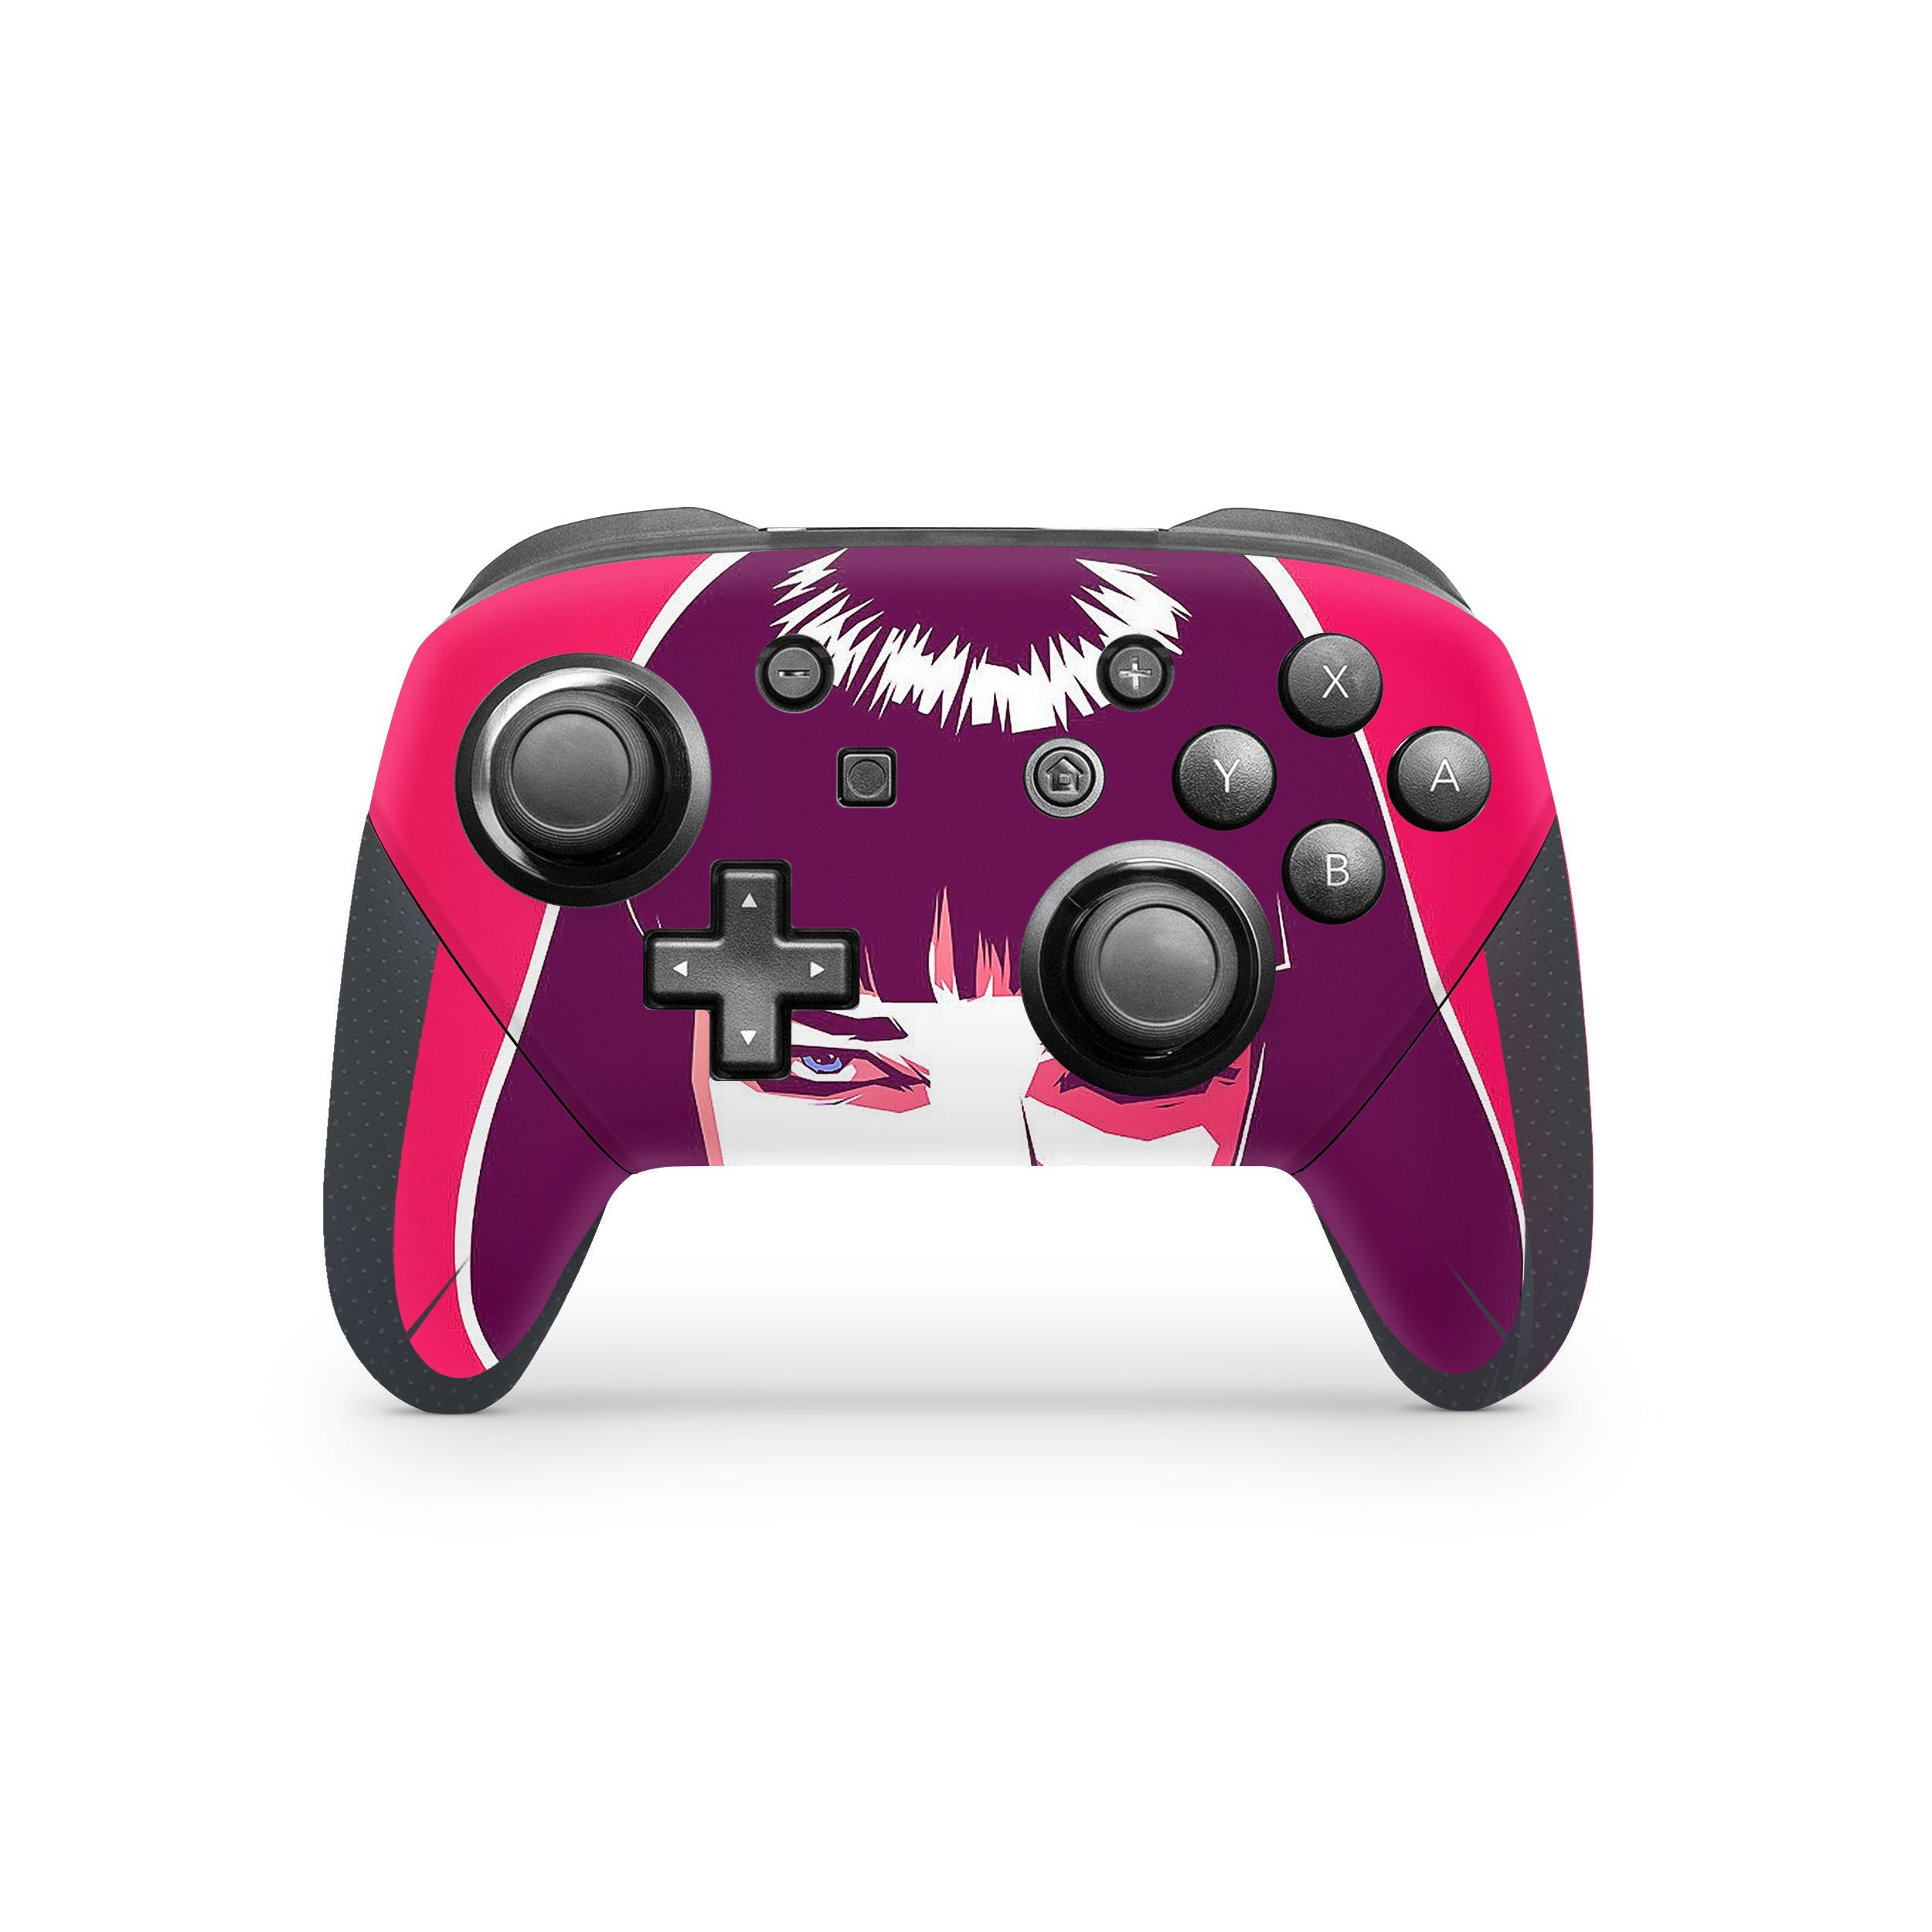 A video game skin featuring a Pulp Fiction Mya Blow design for the Switch Pro Controller.